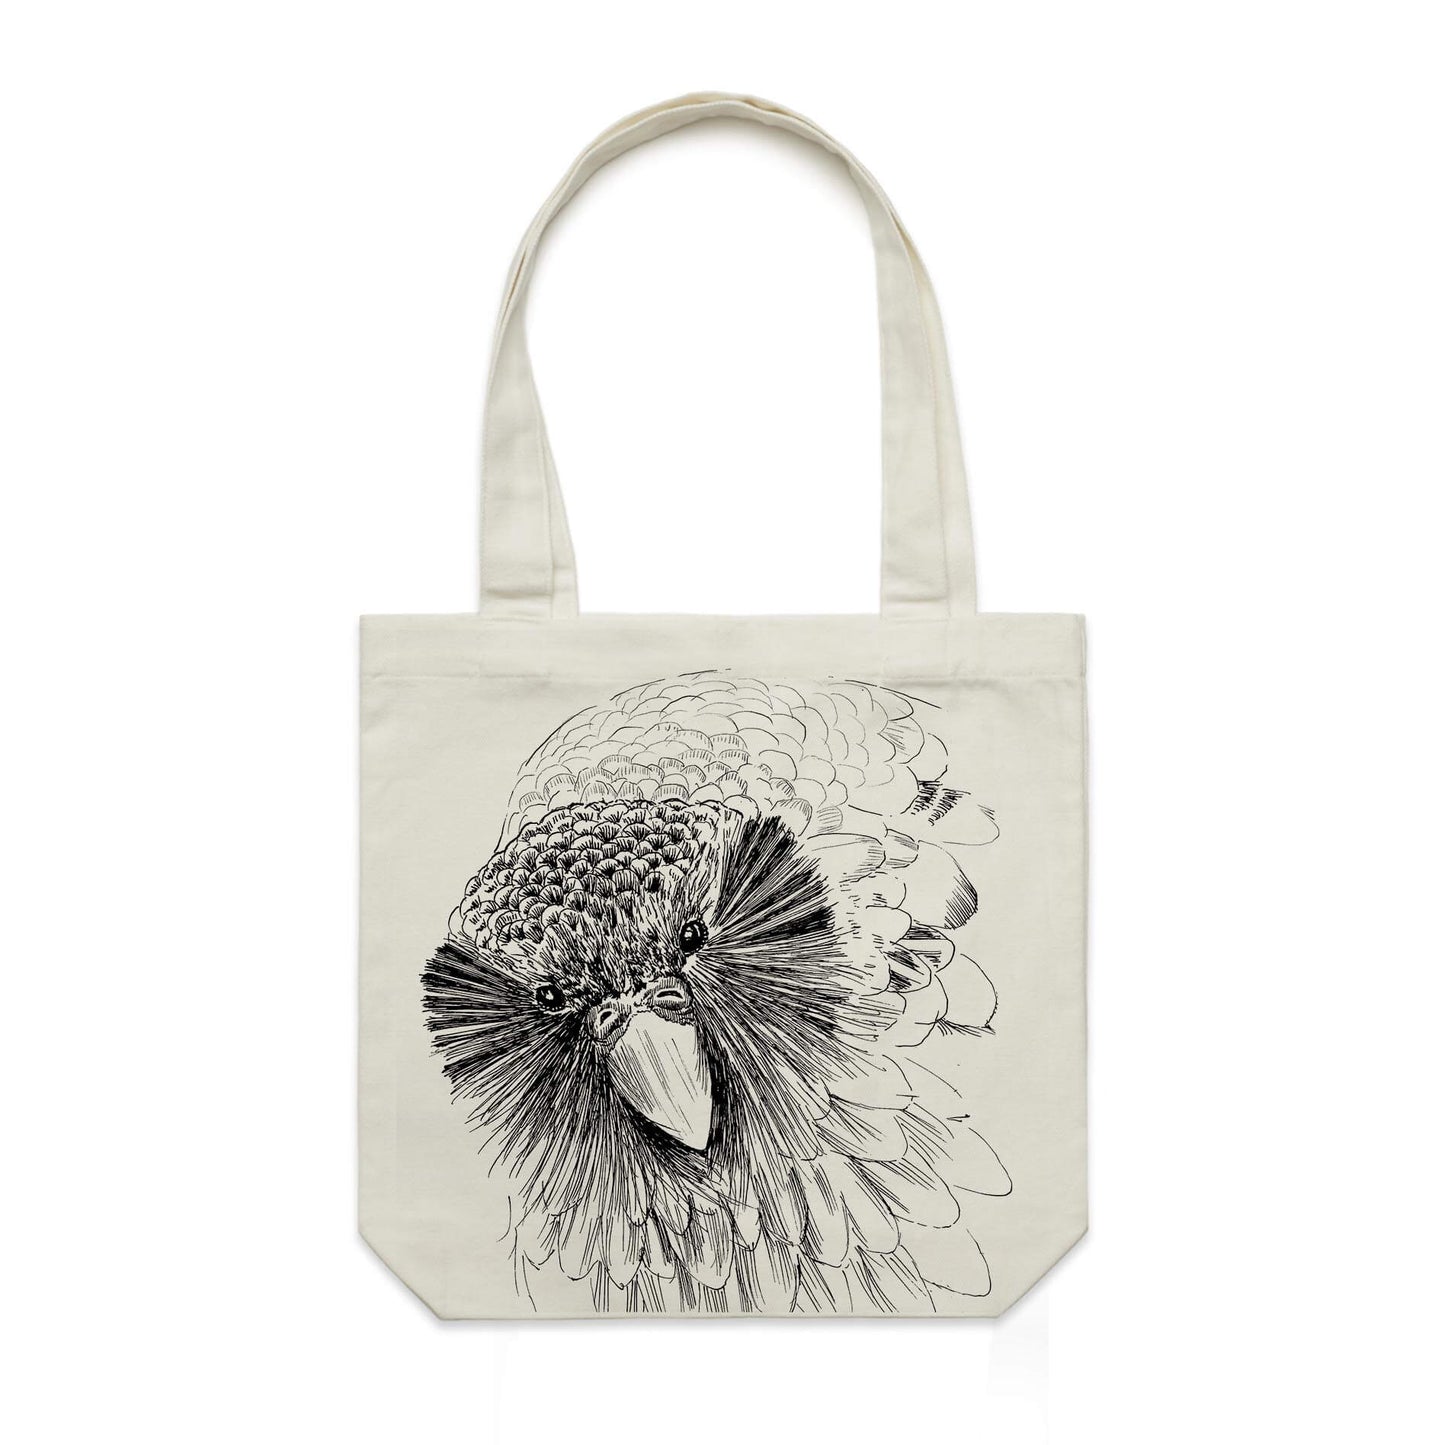 Cotton canvas tote bag with a screen printed Sirocco the Kākāpō design.